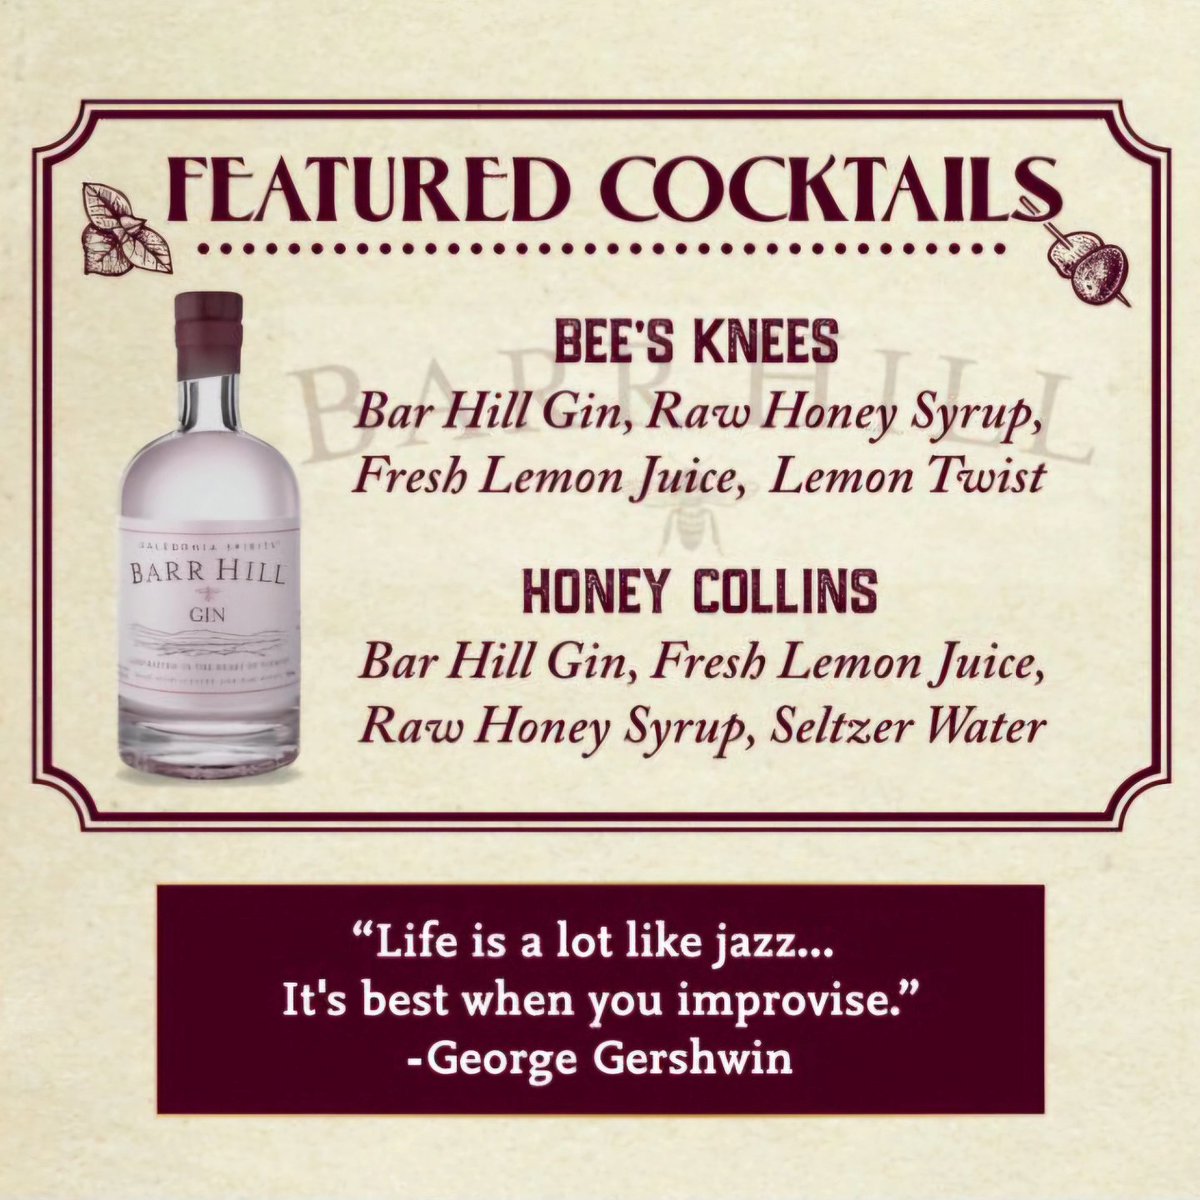 #datenight 🐝 @CatJazzClub is proud to serve... BARR HILL GIN AMERICA'S MOST AWARDED GIN @BarrHillGin is our ode to the hardworking bees of the Northeast. 🐝 More info, visit barrhill.com/products/barr-… #barrhillgin #catalinajazzclub #jazz